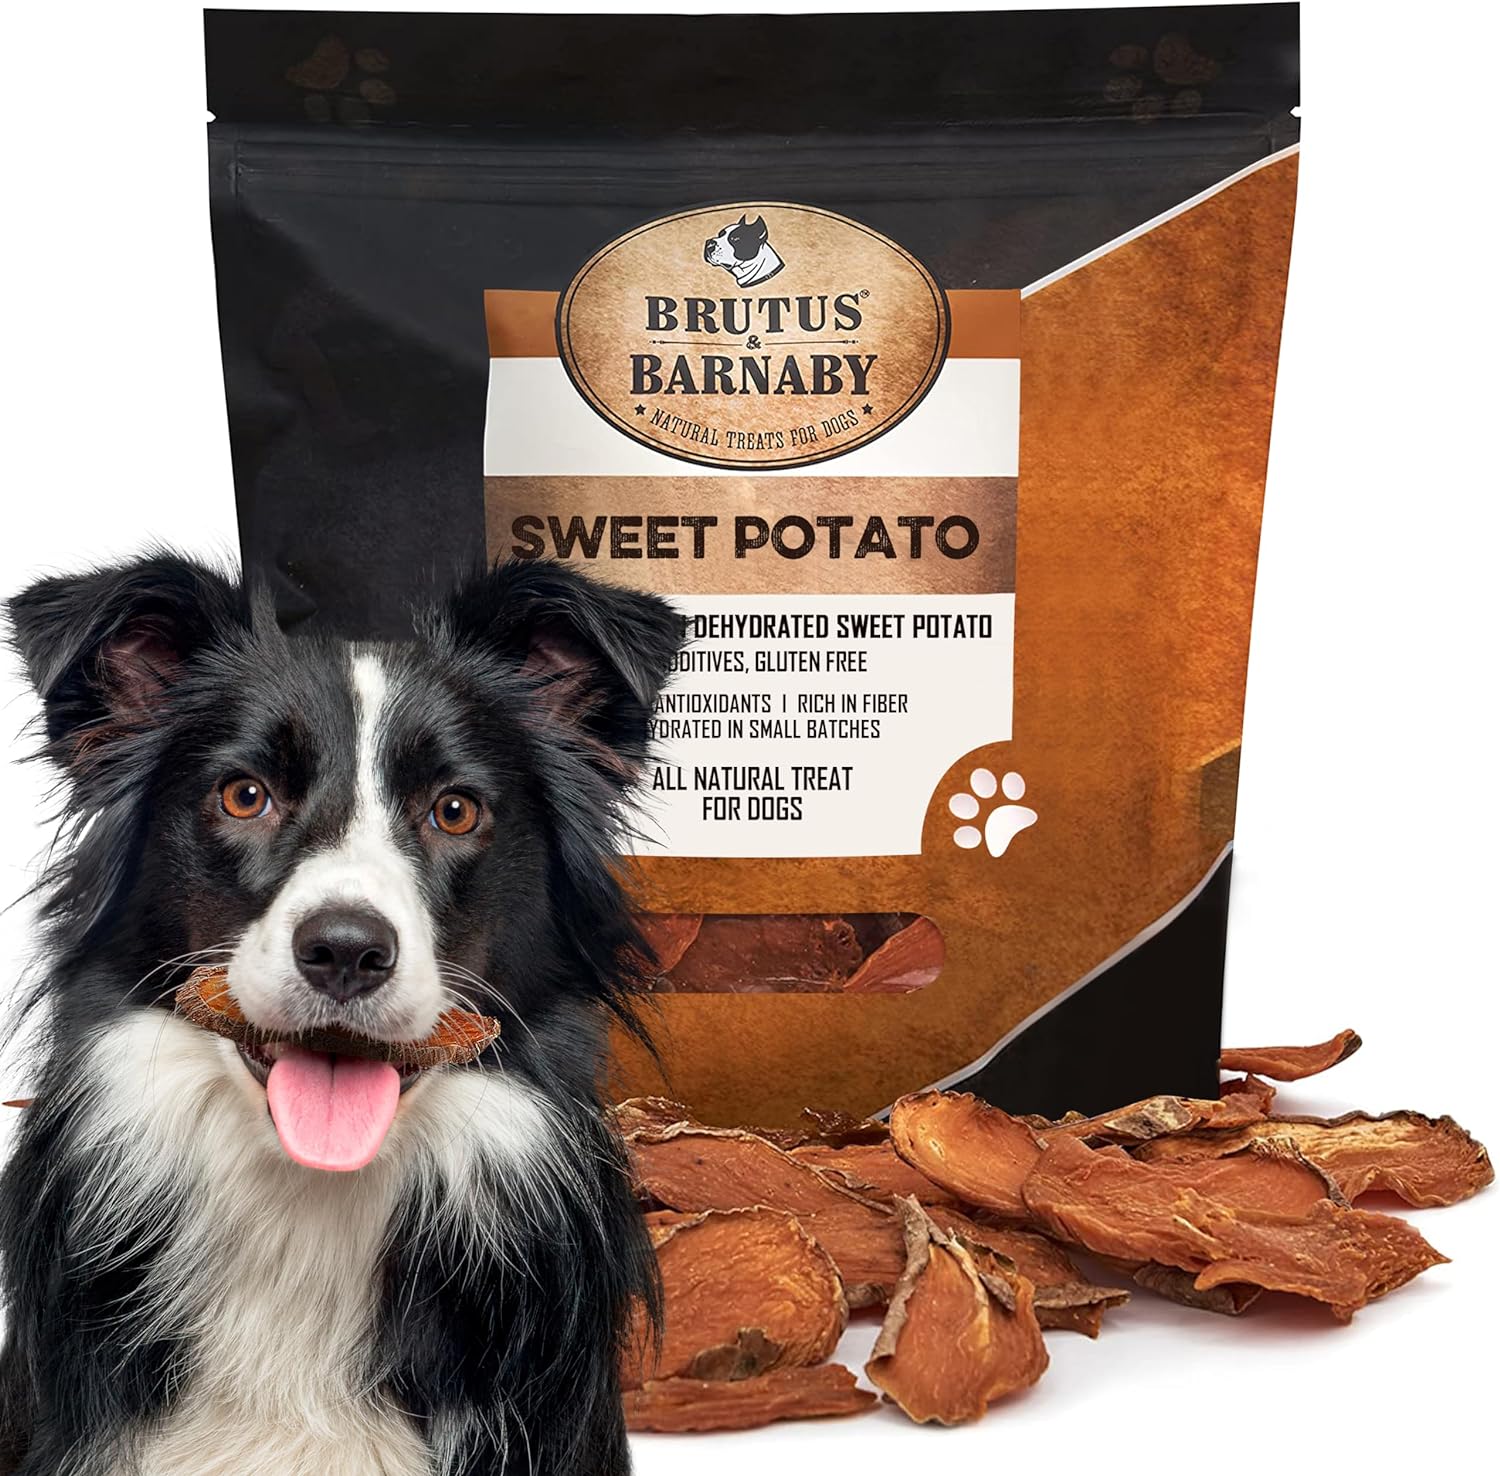 Sweet Potato Slices For Dogs - Single Ingredient Grain Free Dog Treats, Best High Anti-Oxidant Healthy 100% Natural Thick Cut Dried Sweet Potato Dog Treats With No Added Preservatives (14oz)